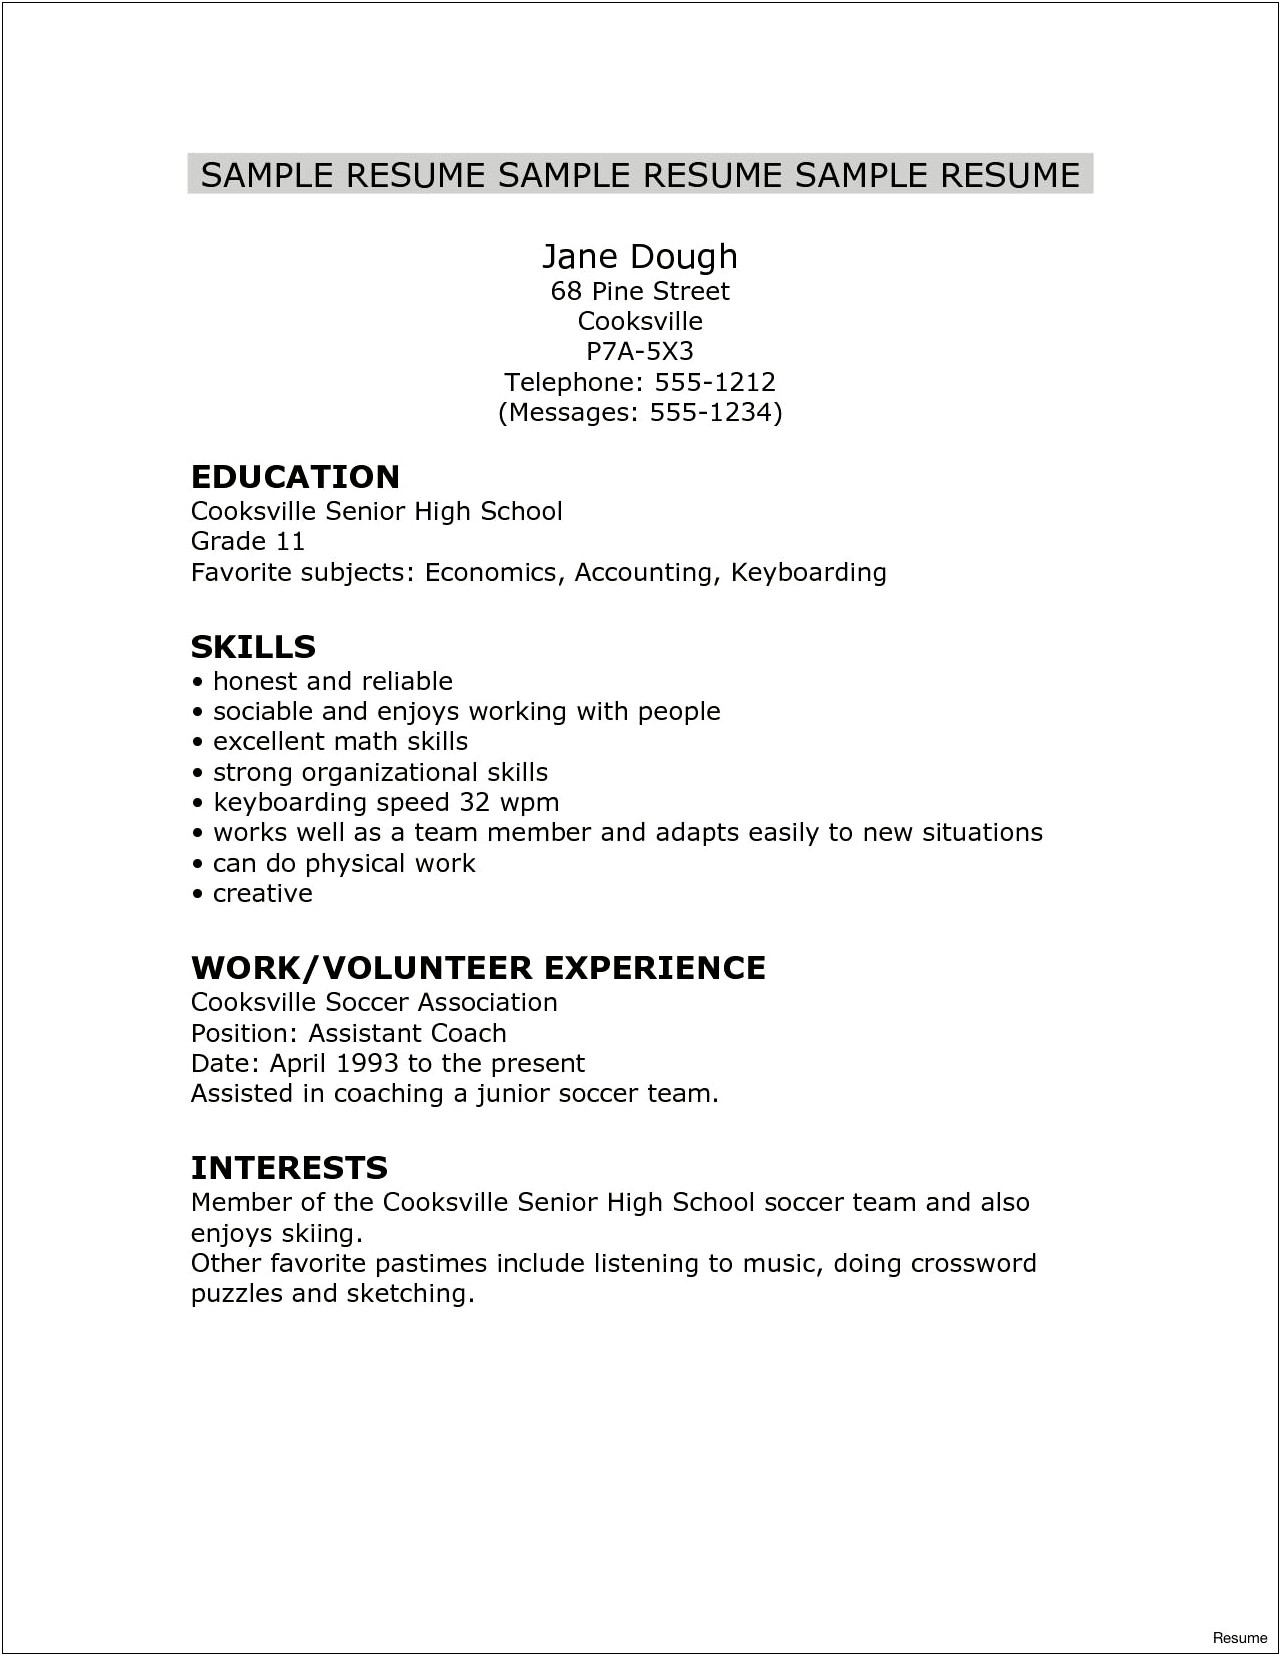 Sample Music Resume For College Application